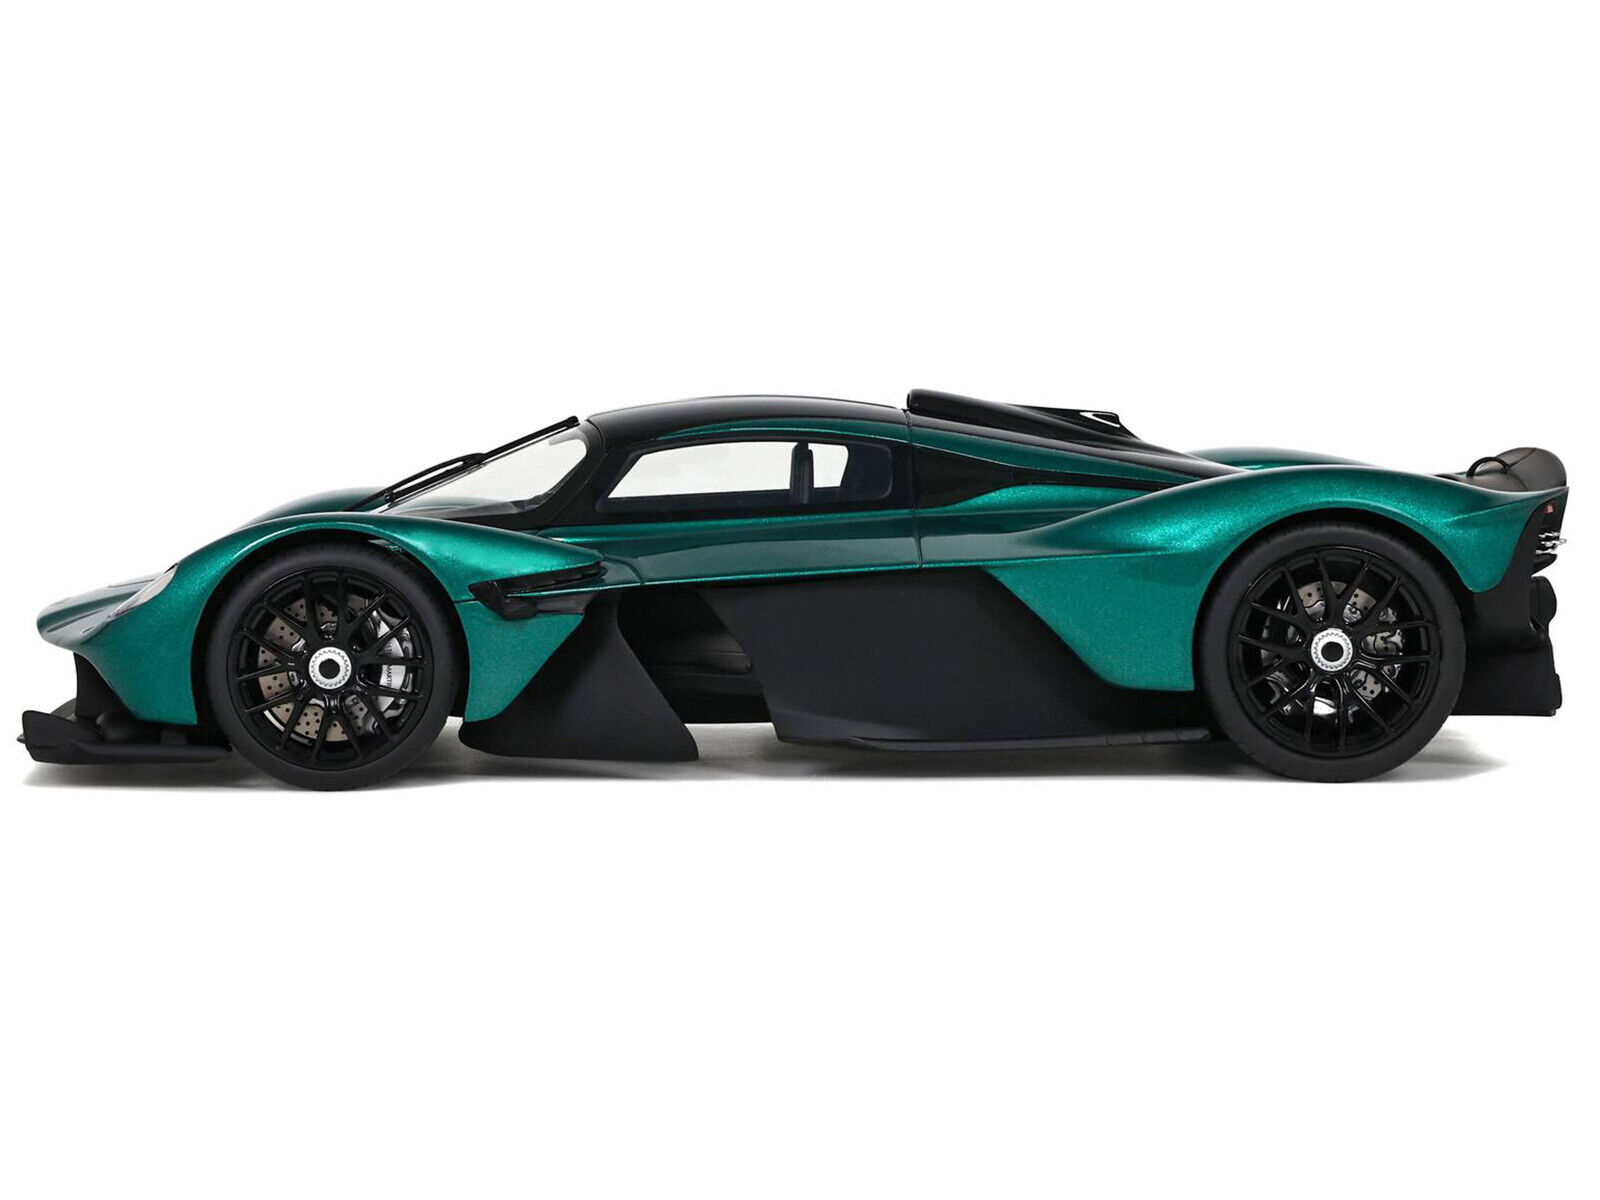 2021 Aston Martin Valkyrie British Racing Green with Black Top 1/18 Model Car by